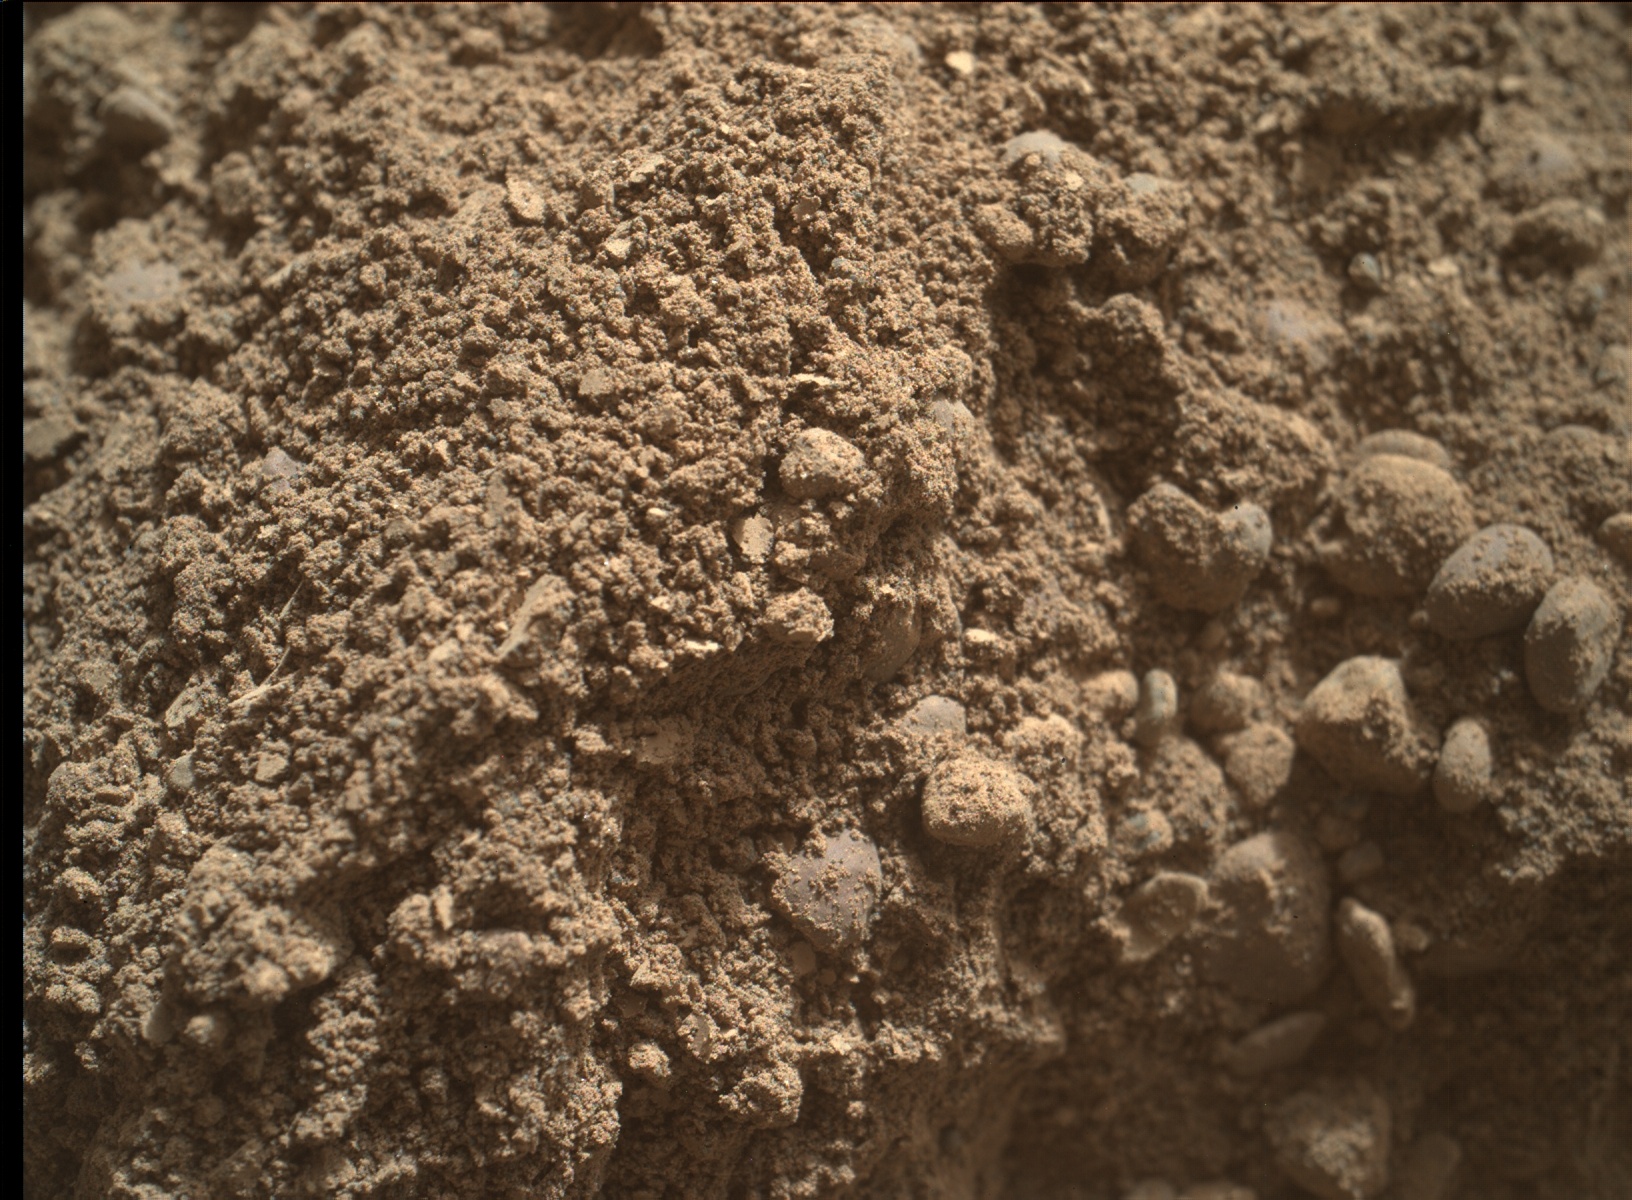 Nasa's Mars rover Curiosity acquired this image using its Mars Hand Lens Imager (MAHLI) on Sol 2558